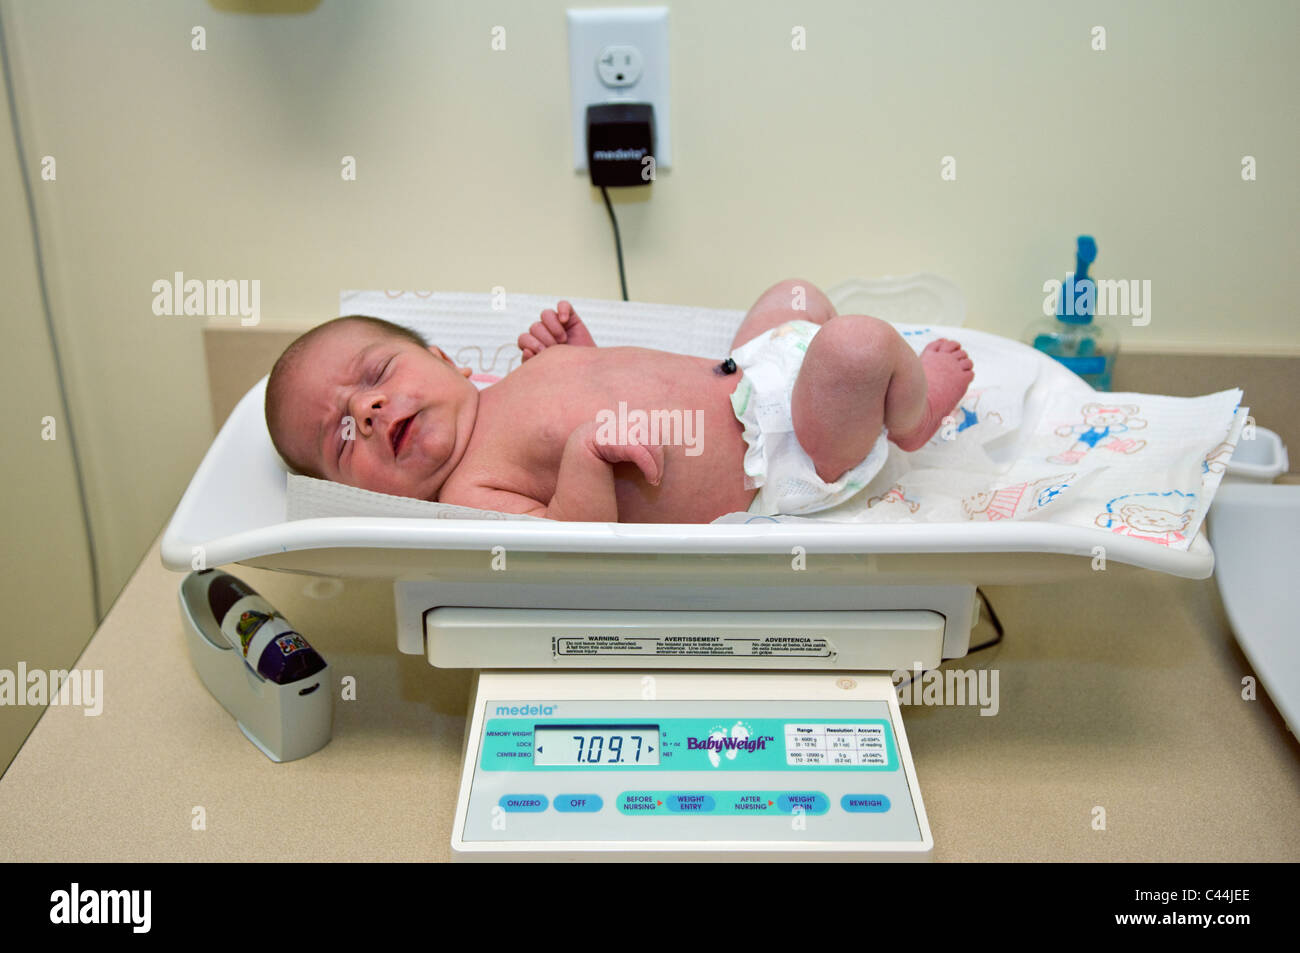 https://c8.alamy.com/comp/C44JEE/one-week-old-baby-being-weighed-during-first-visit-to-the-pediatrician-C44JEE.jpg